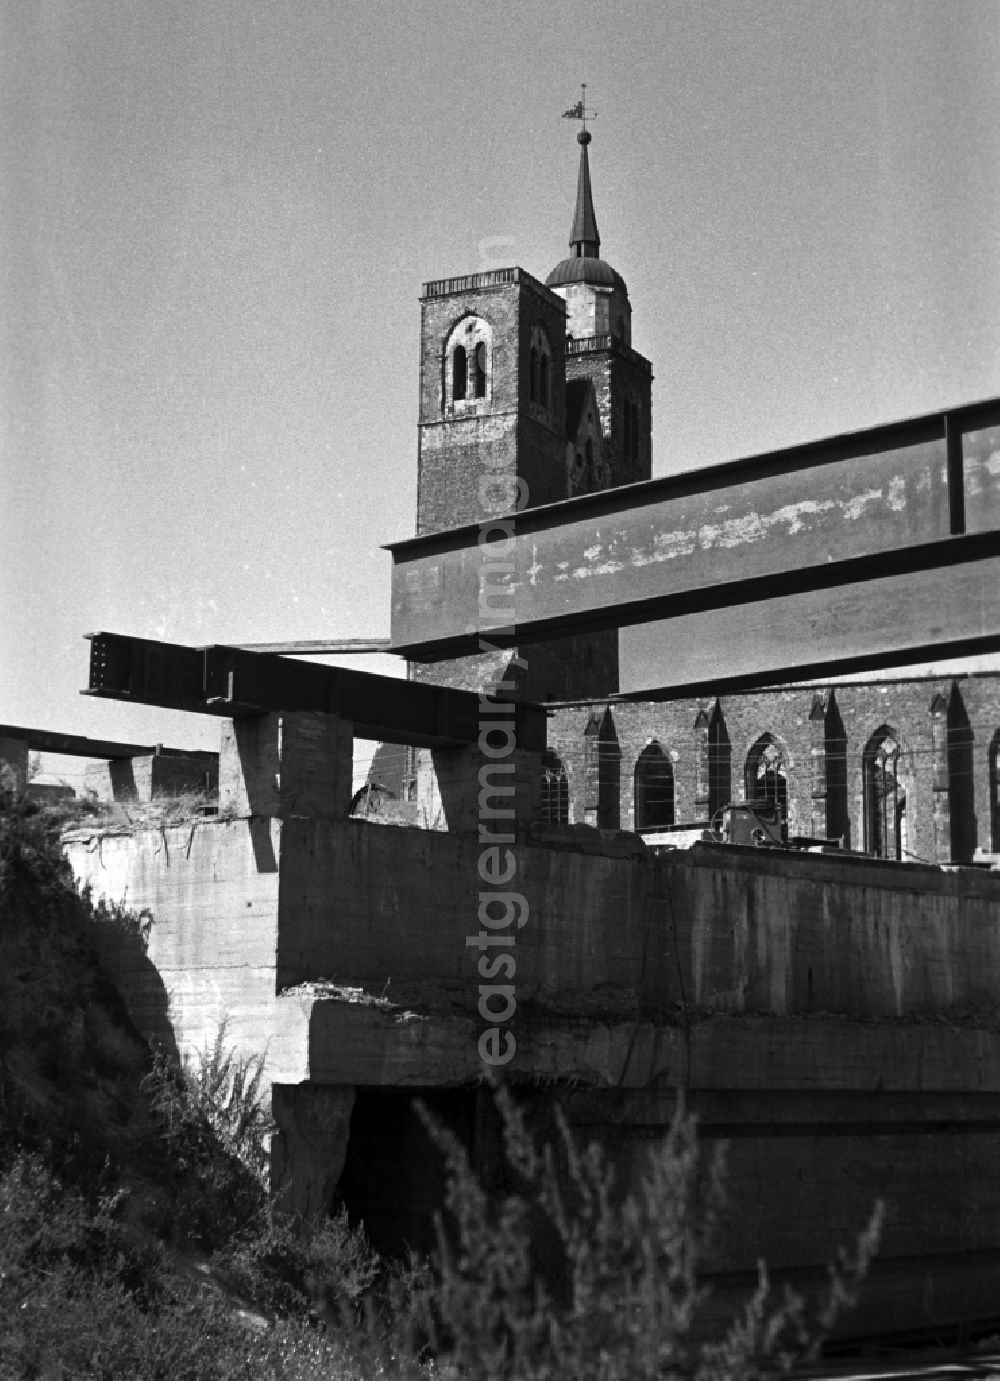 GDR image archive: Magdeburg - Construction of a steel bridge in Magdeburg in Saxony - Anhalt. Steel bridges are wholly or partly made ??of steel buildings, which routes over natural or artificial obstacles continue. In the background is the St. John's Church is seen